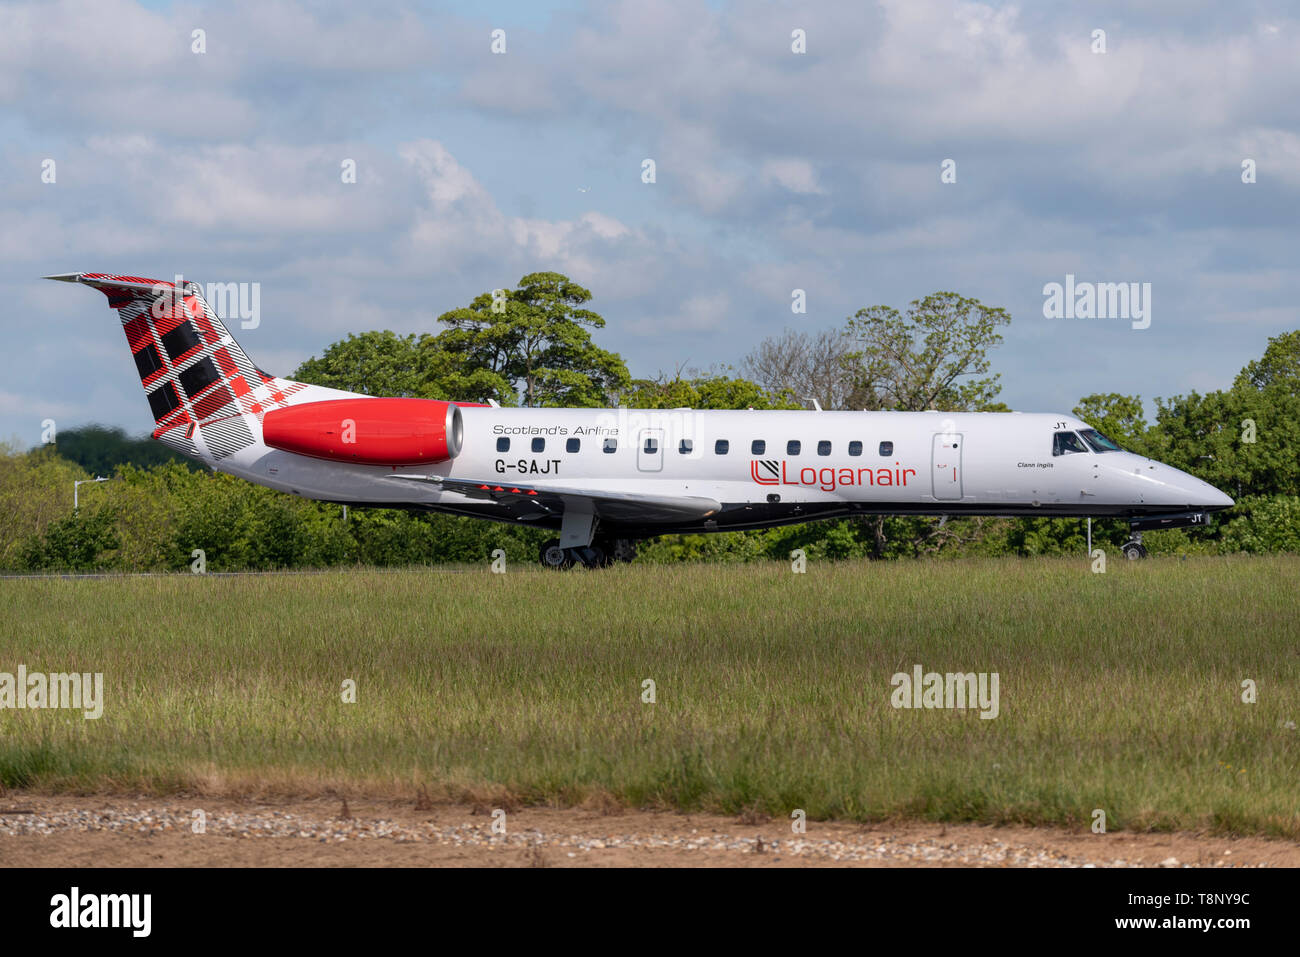 Loganair Embraer ERJ135 airliner at London Southend Airport, Essex, UK. Tartan tail. Lined up for take off Stock Photo